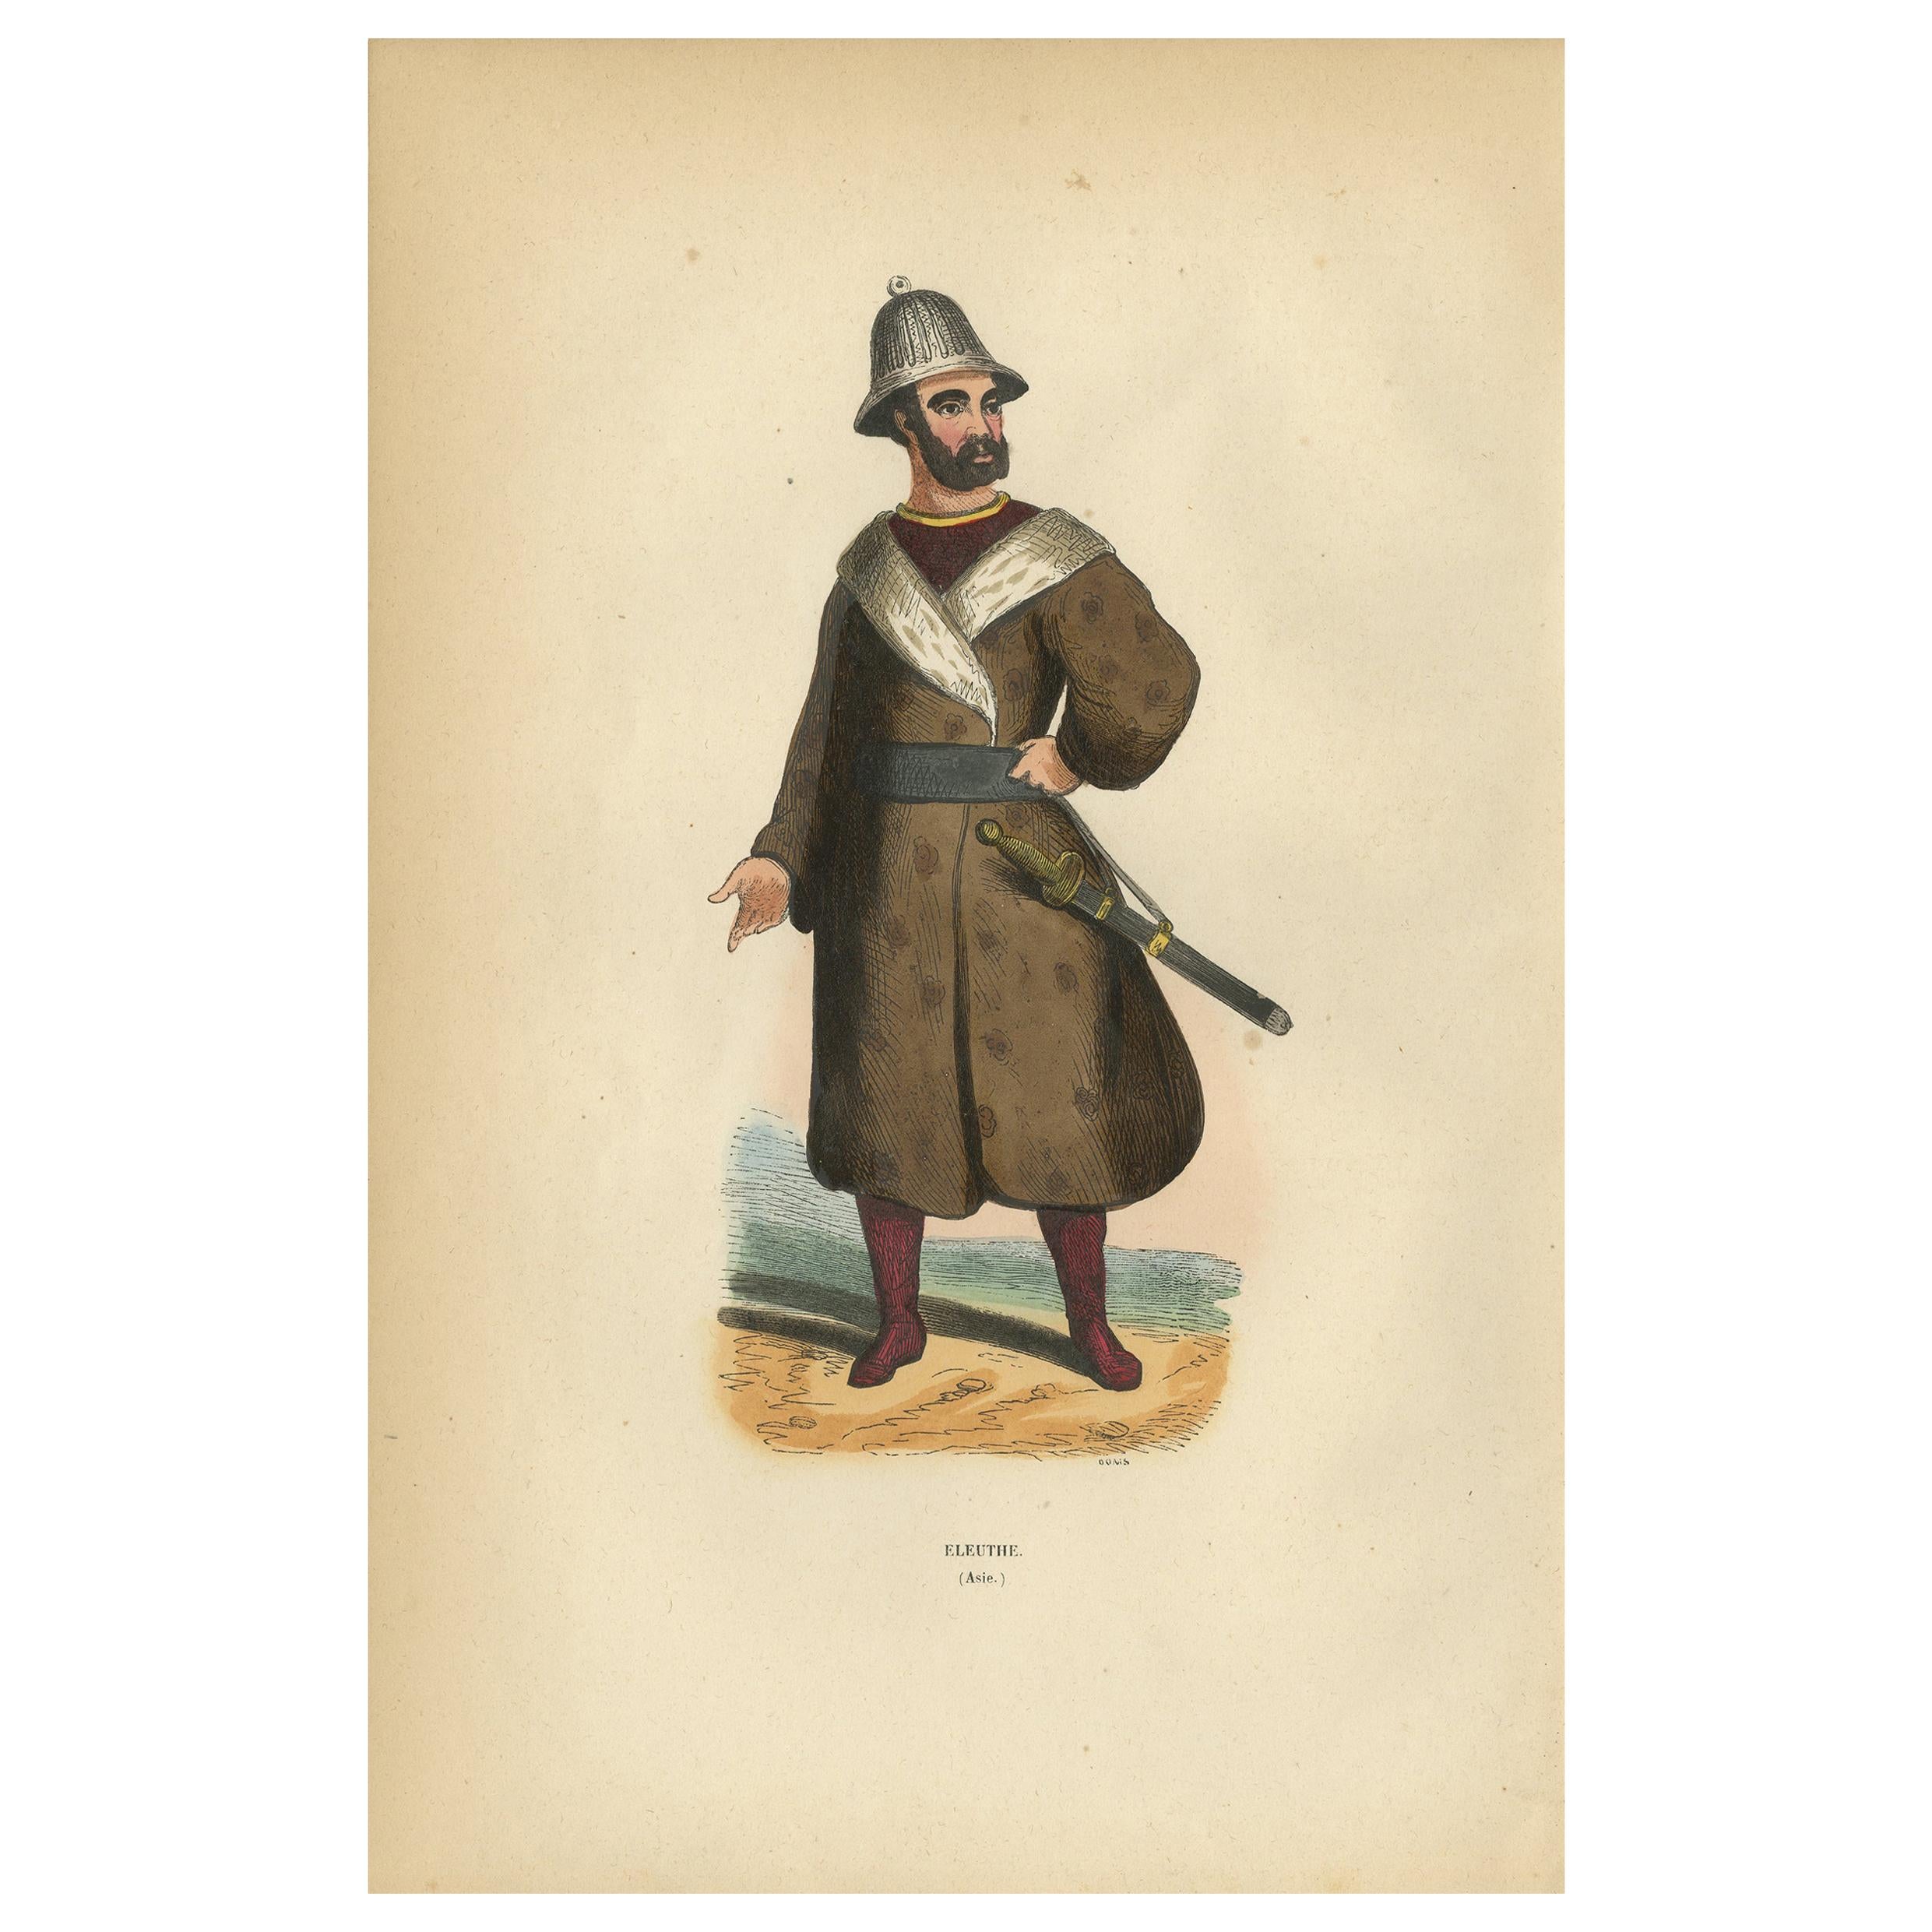 Antique Print of an Eleuth or Oirat man, the westernmost group of the Mongols